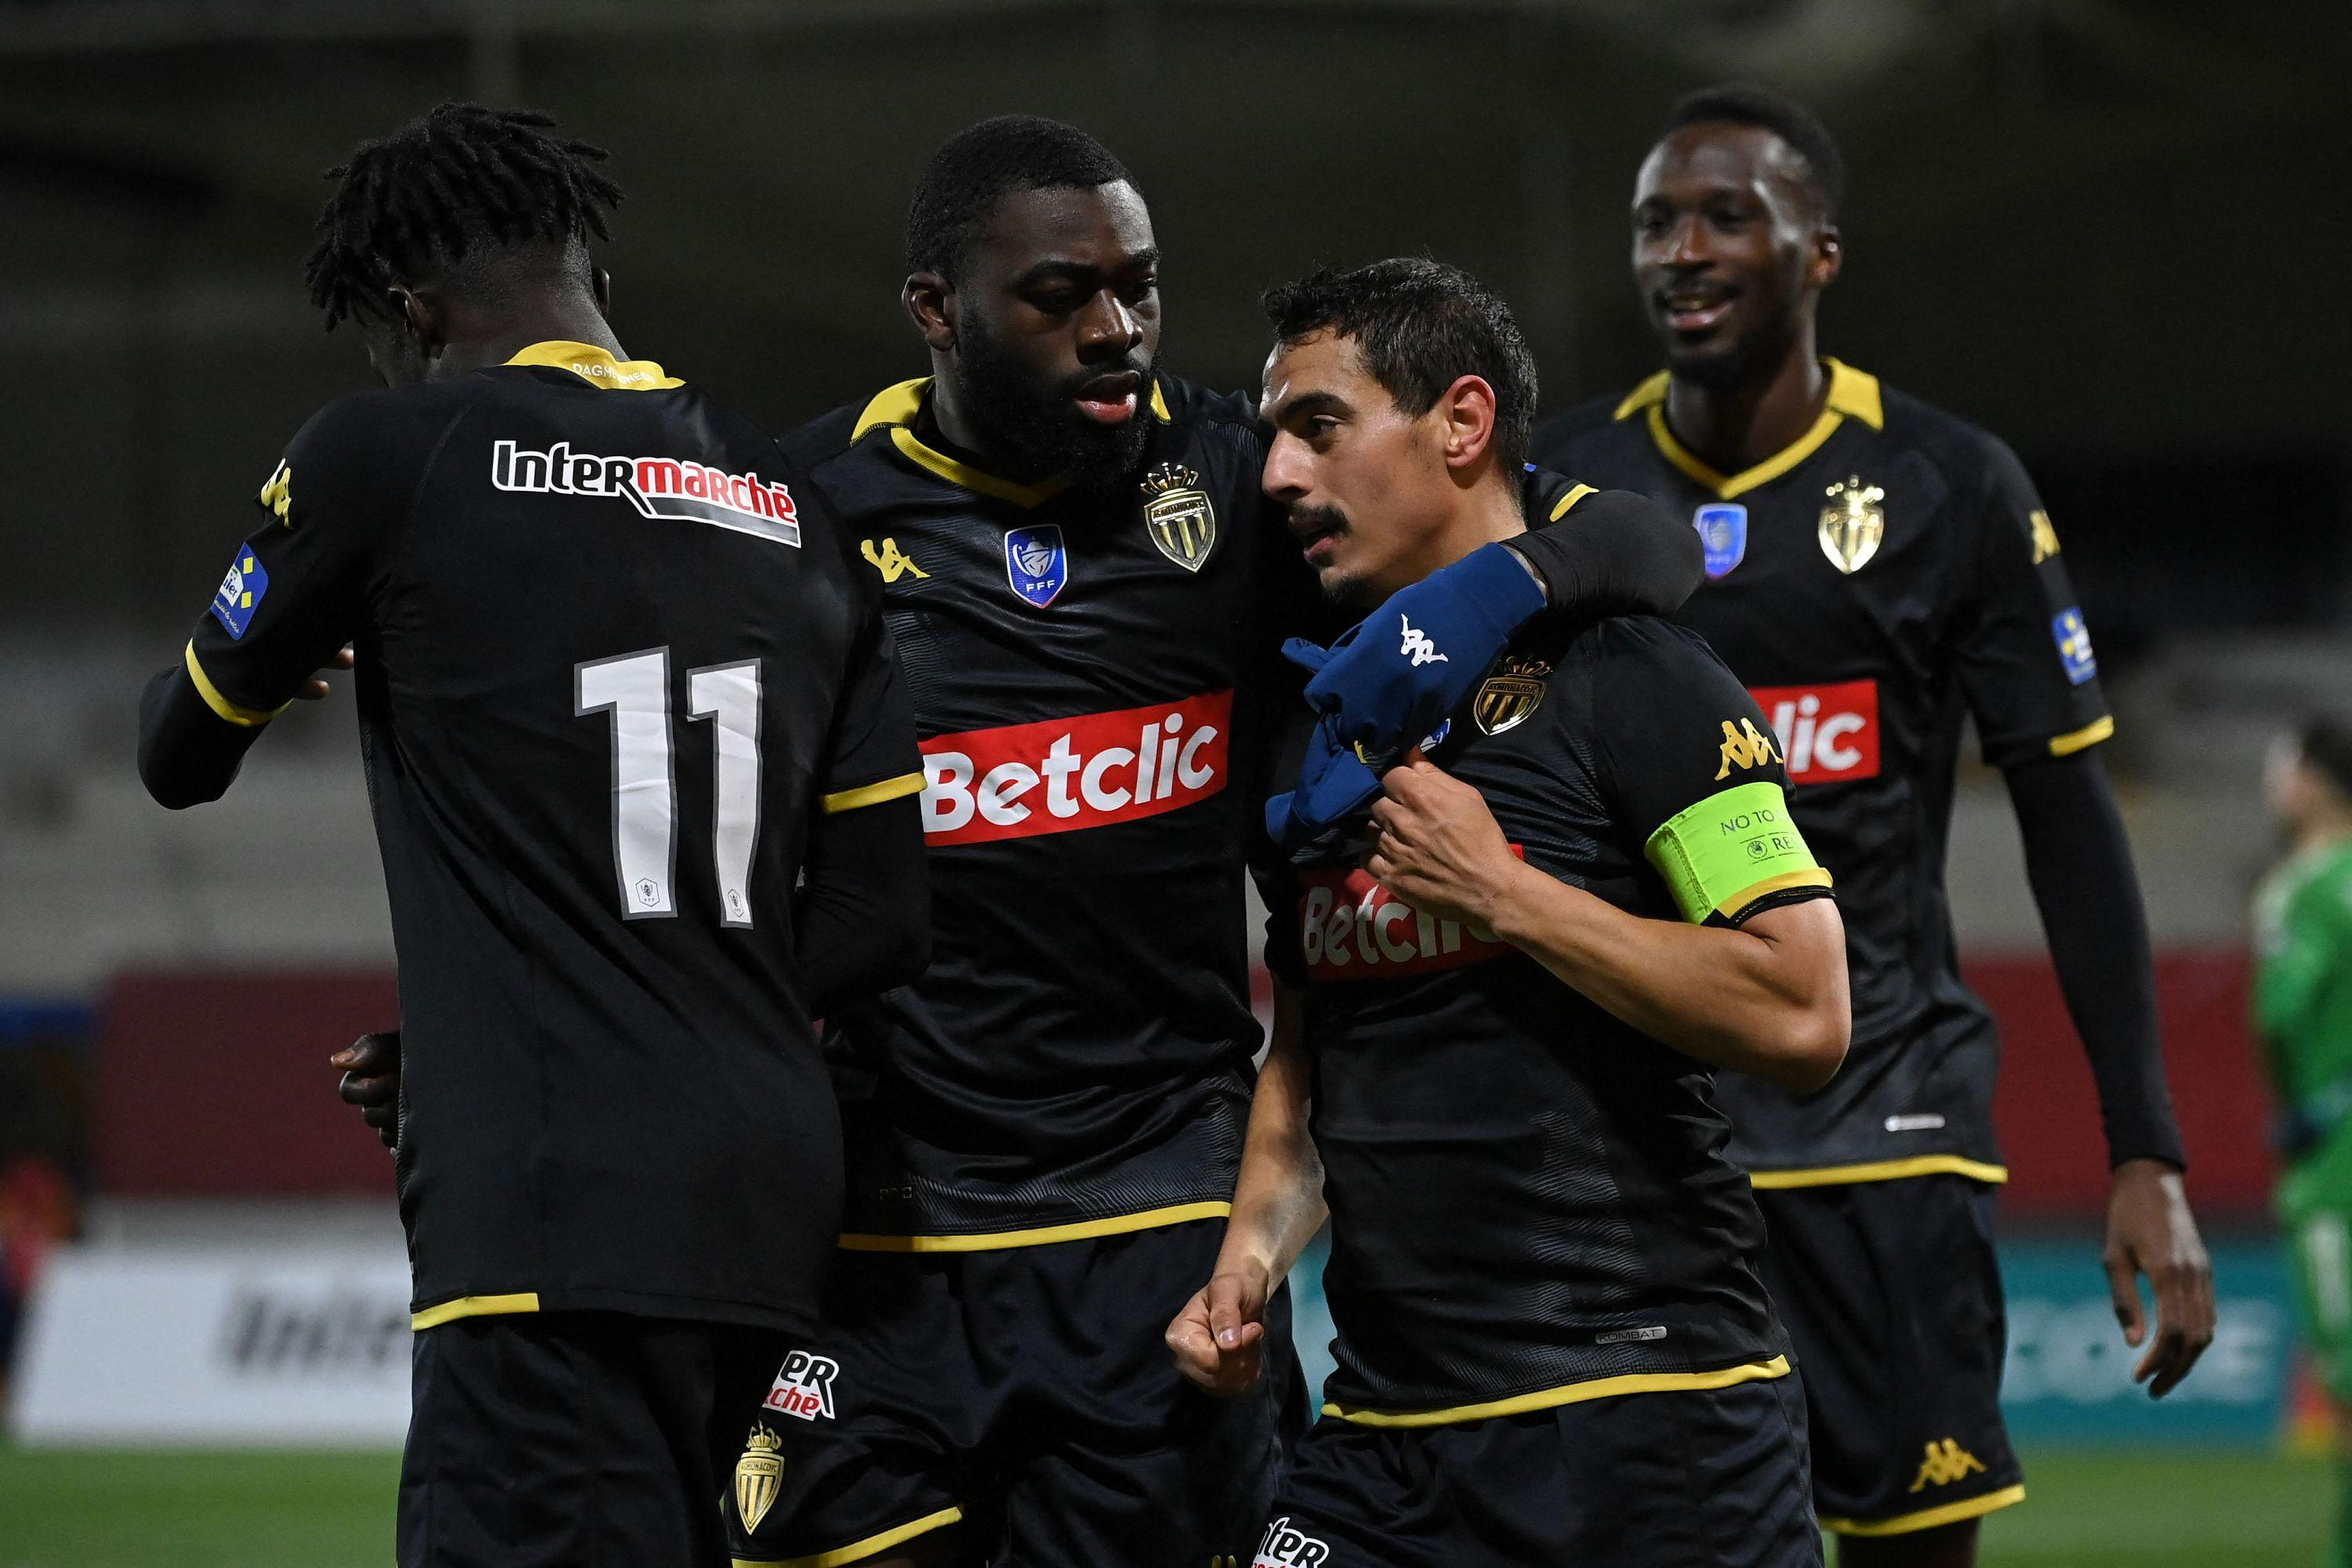 Coupe de France: Ben Yedder is “a great professional”, salutes the Monaco coach